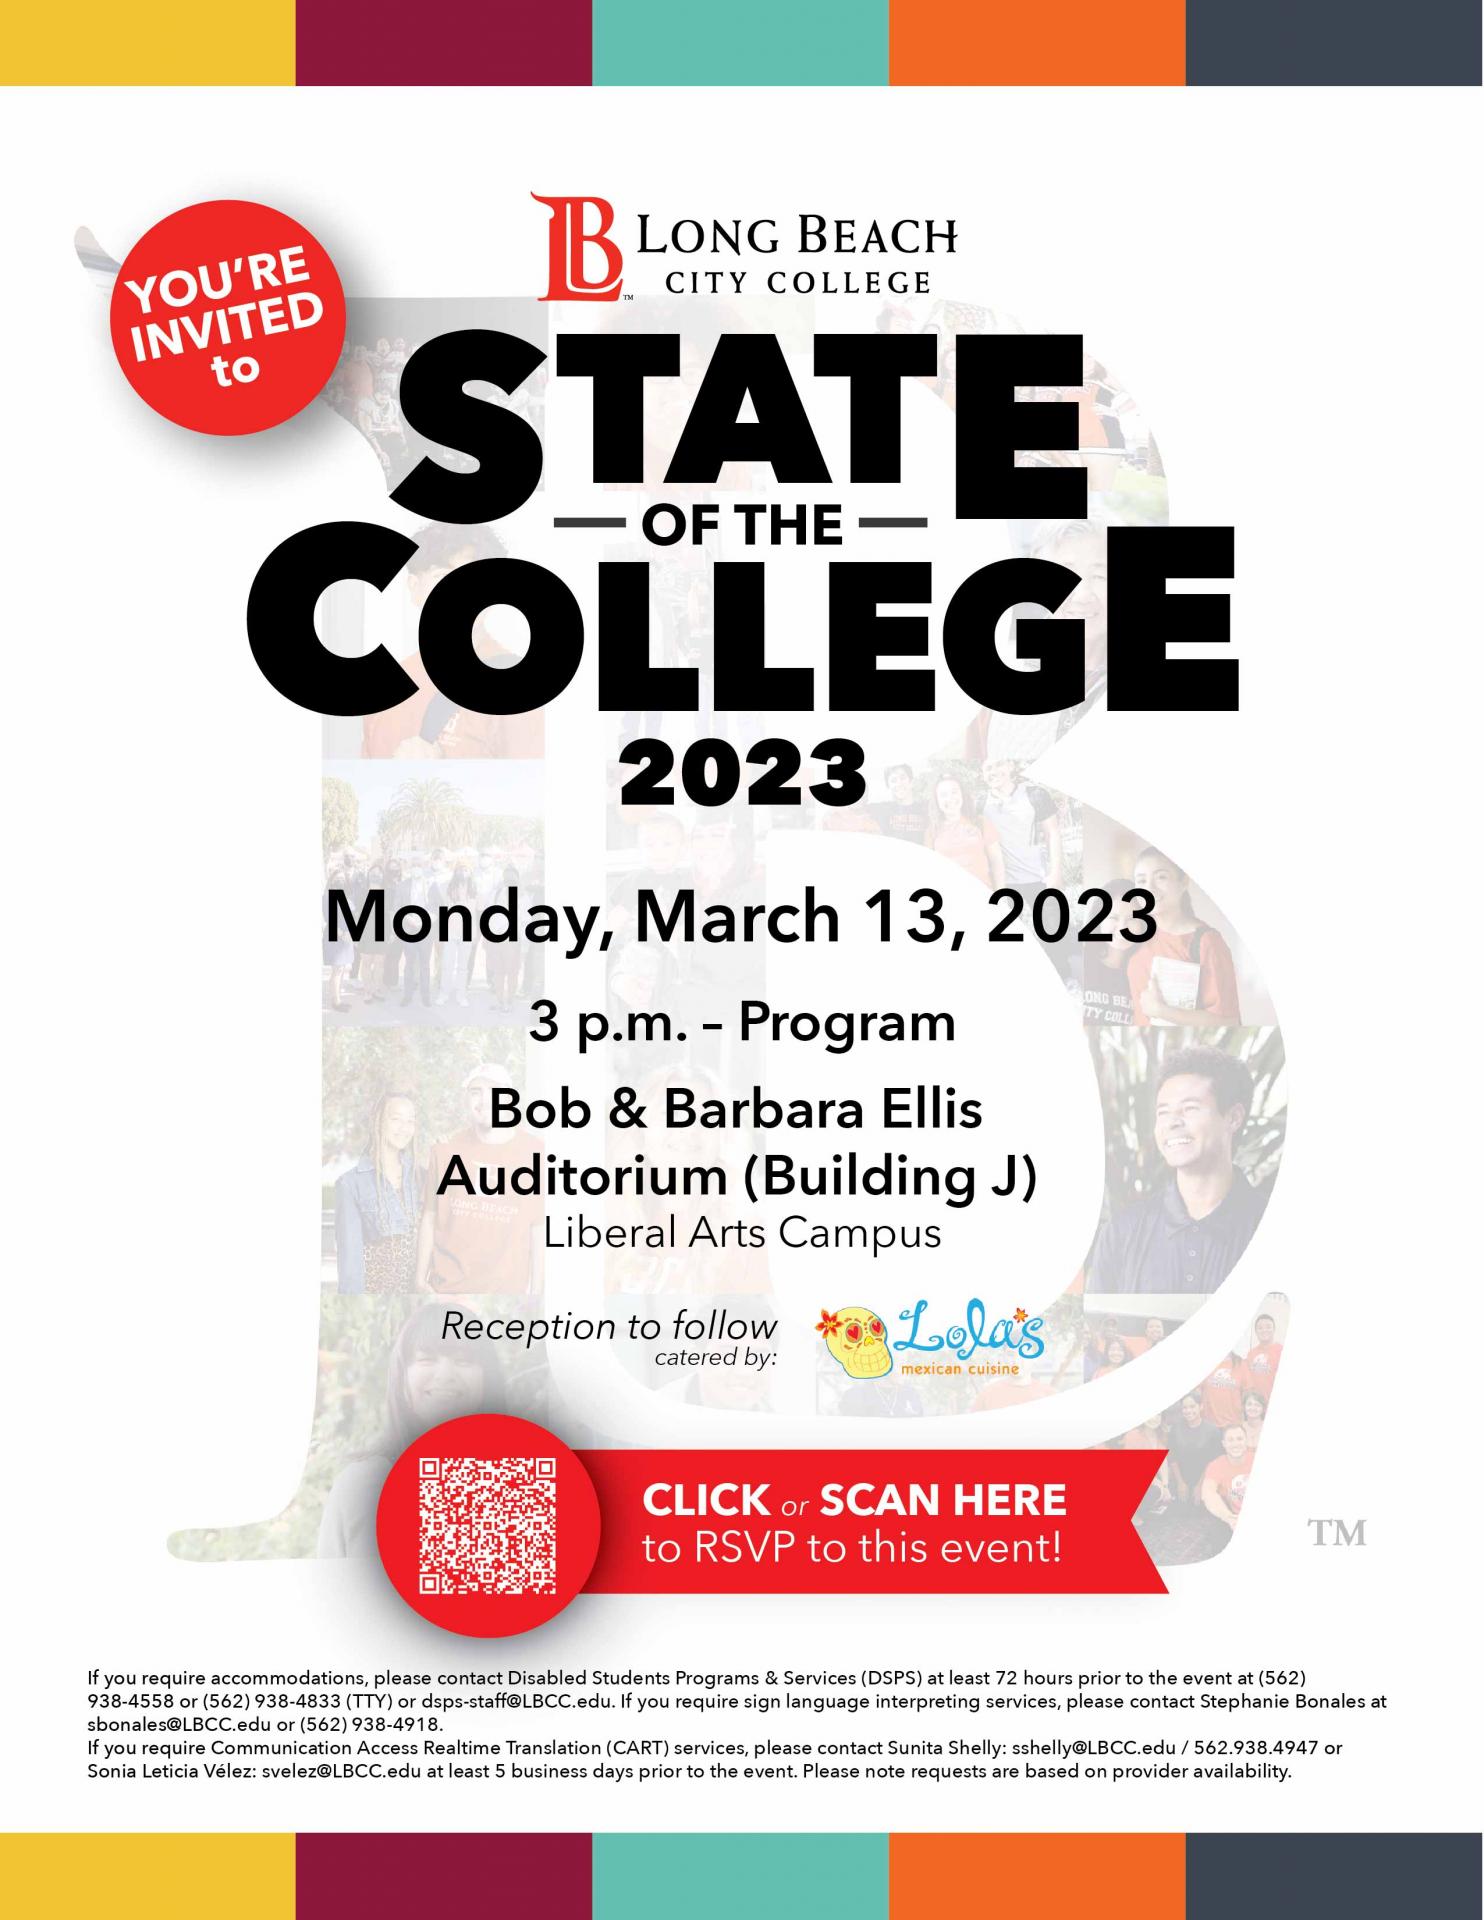 LBCC State of the College 2023 Flyer Image